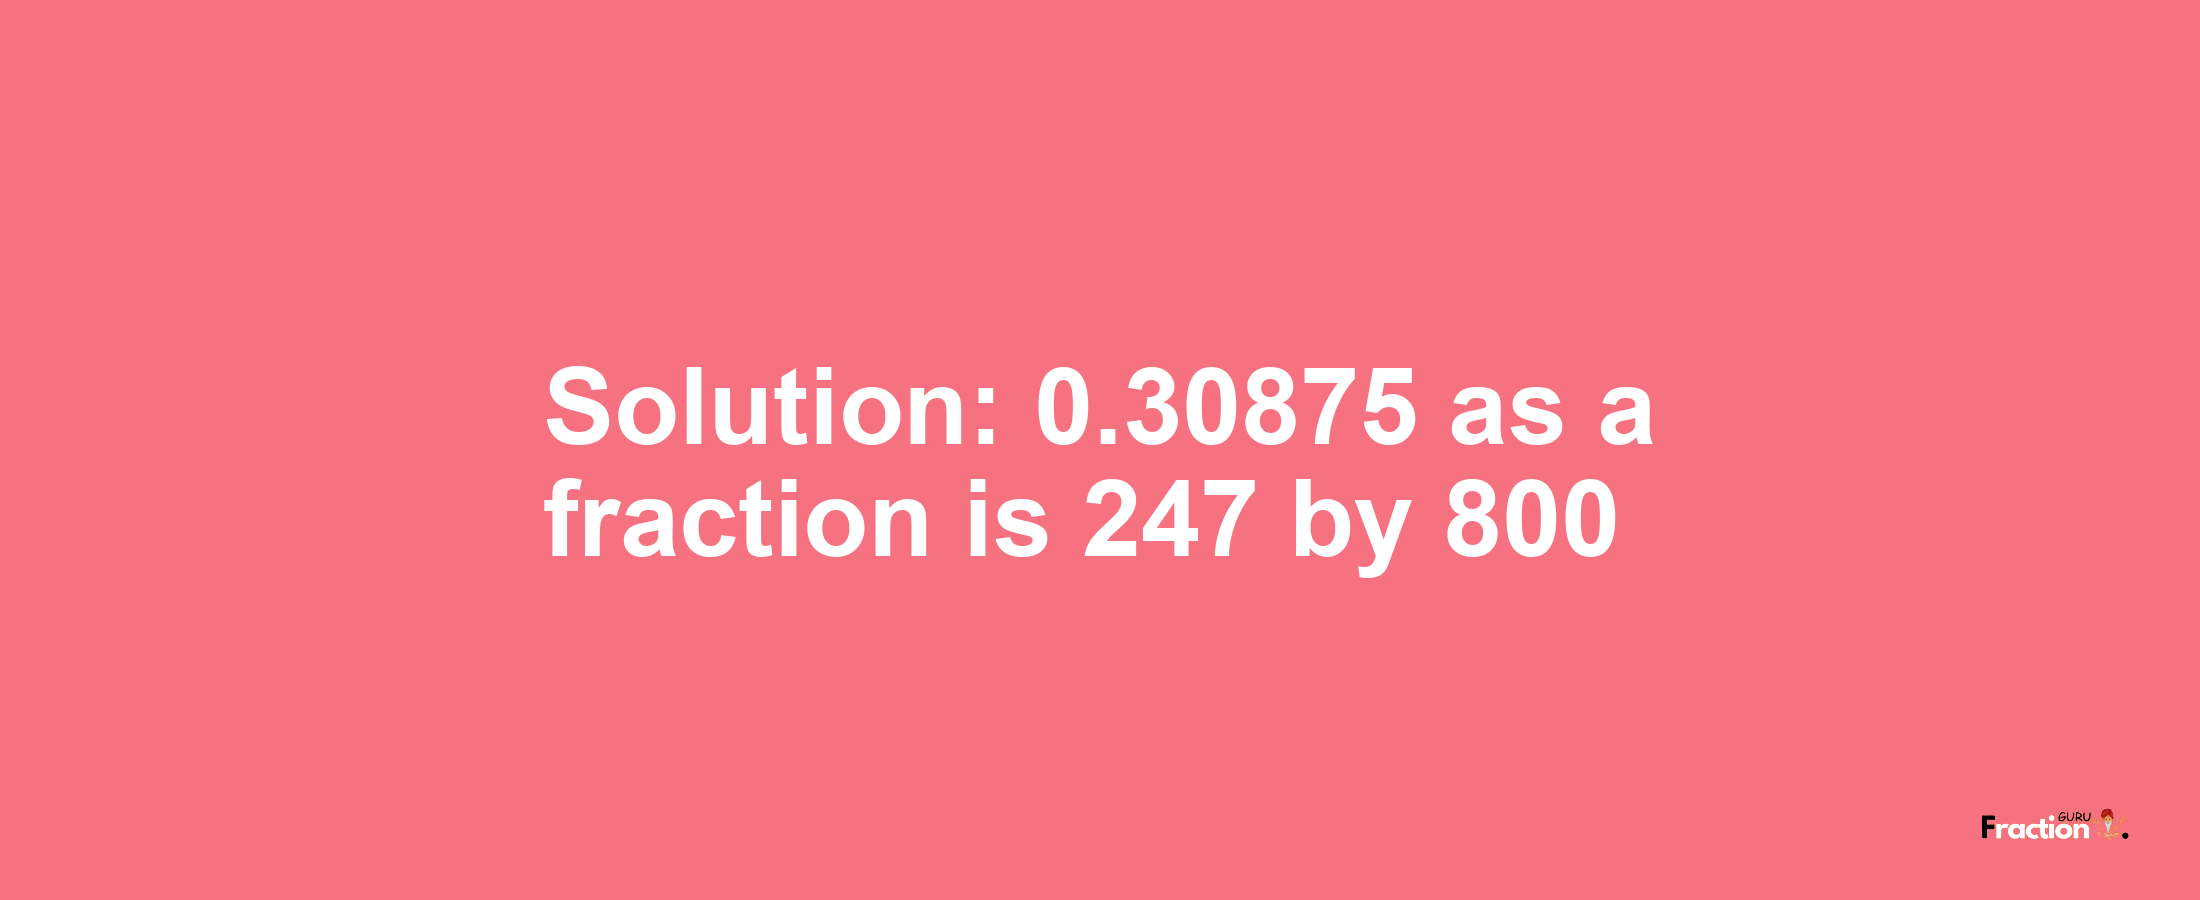 Solution:0.30875 as a fraction is 247/800